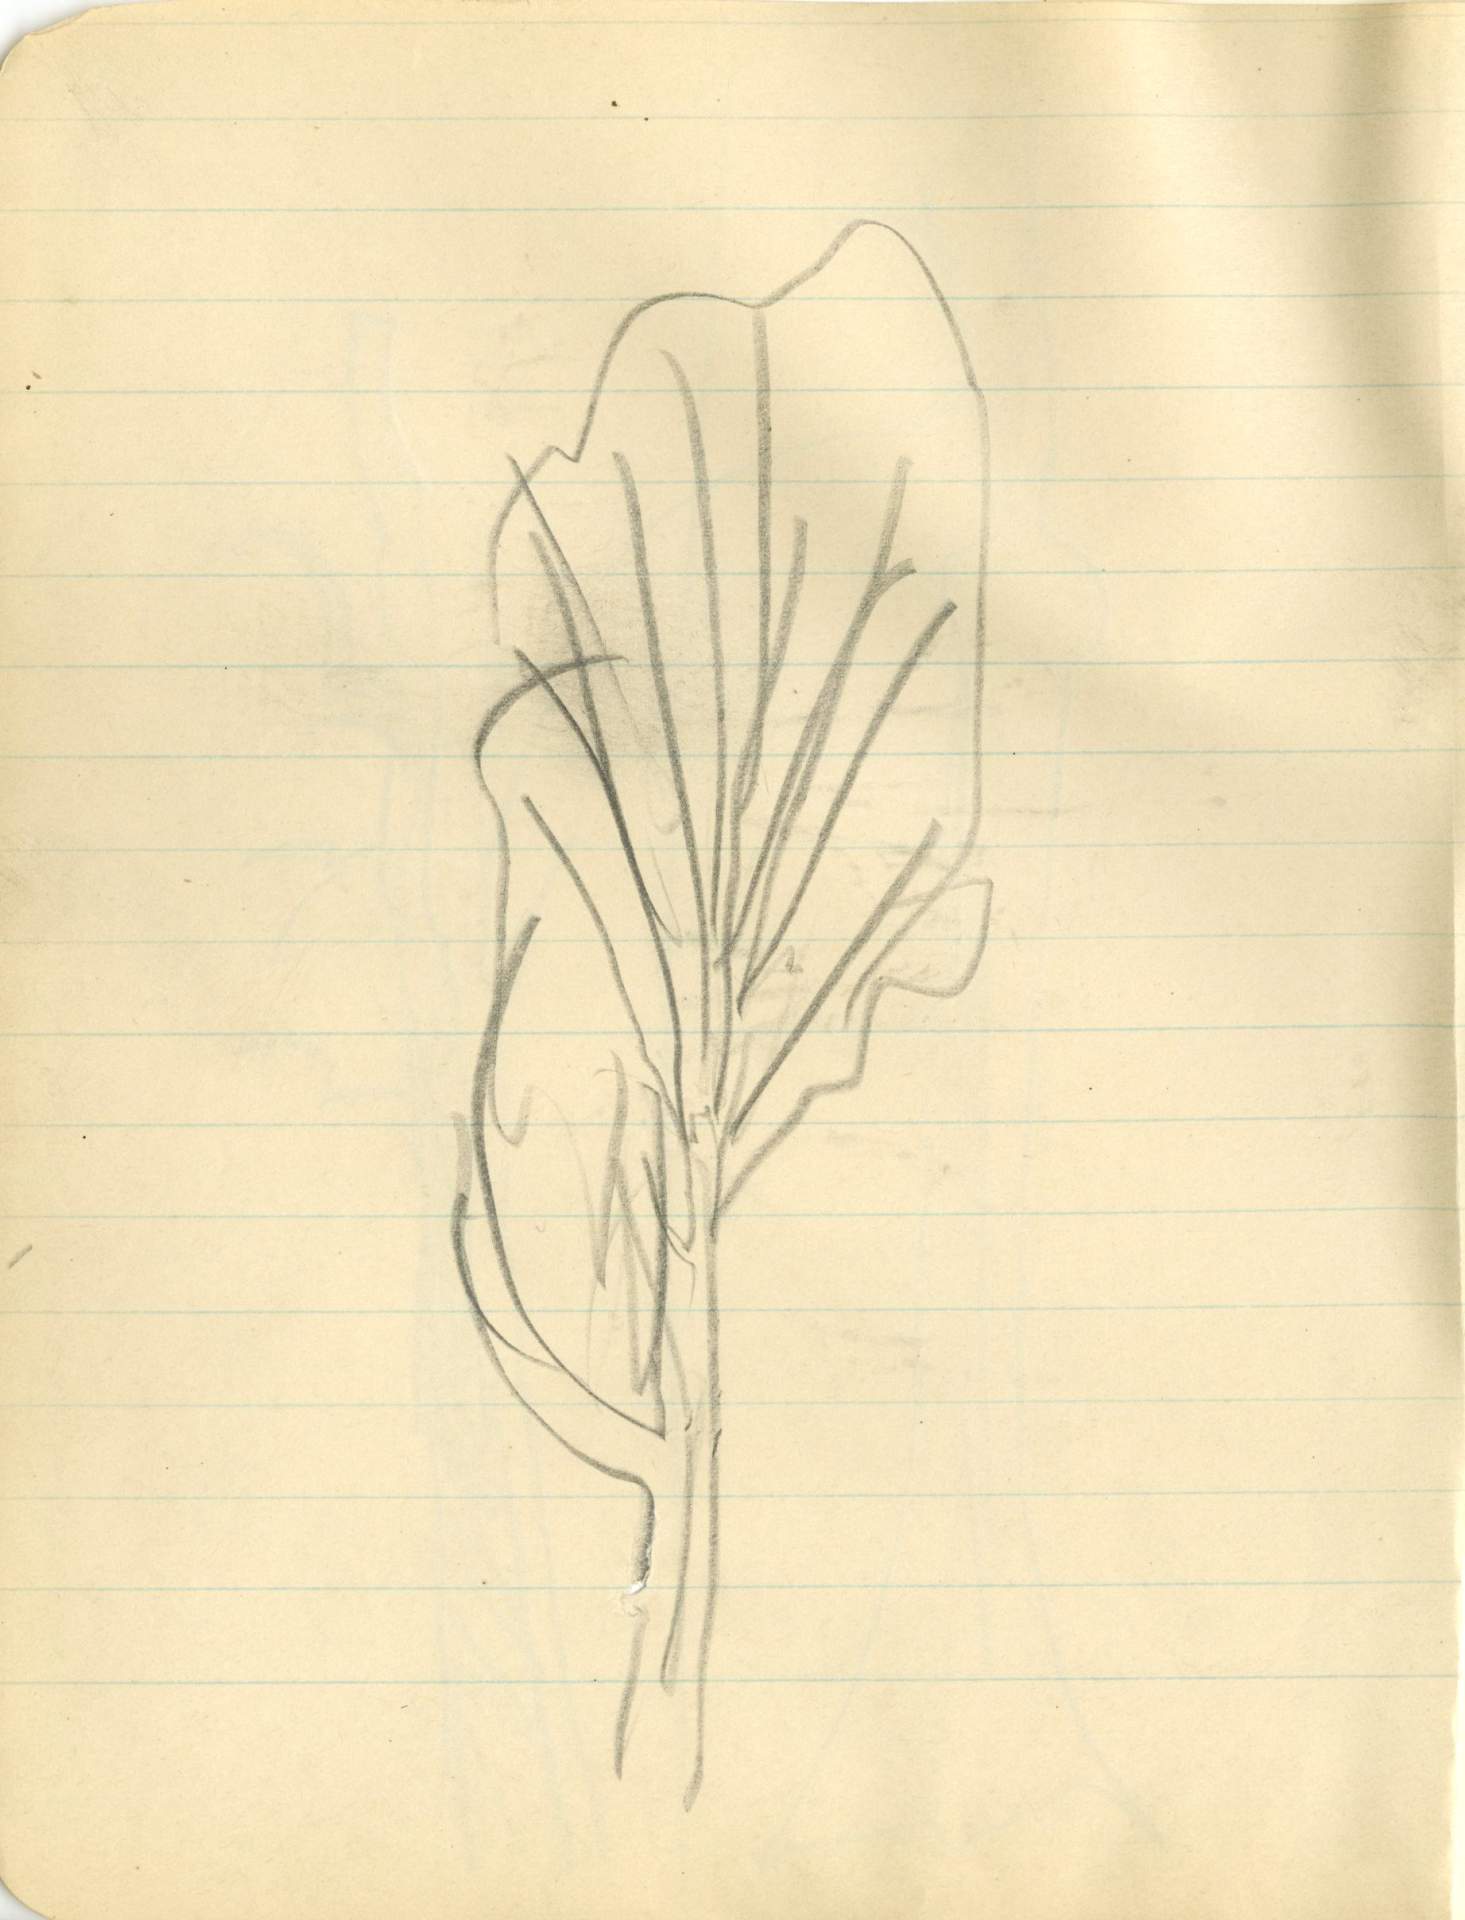 Sketch with branches and outline of leaves